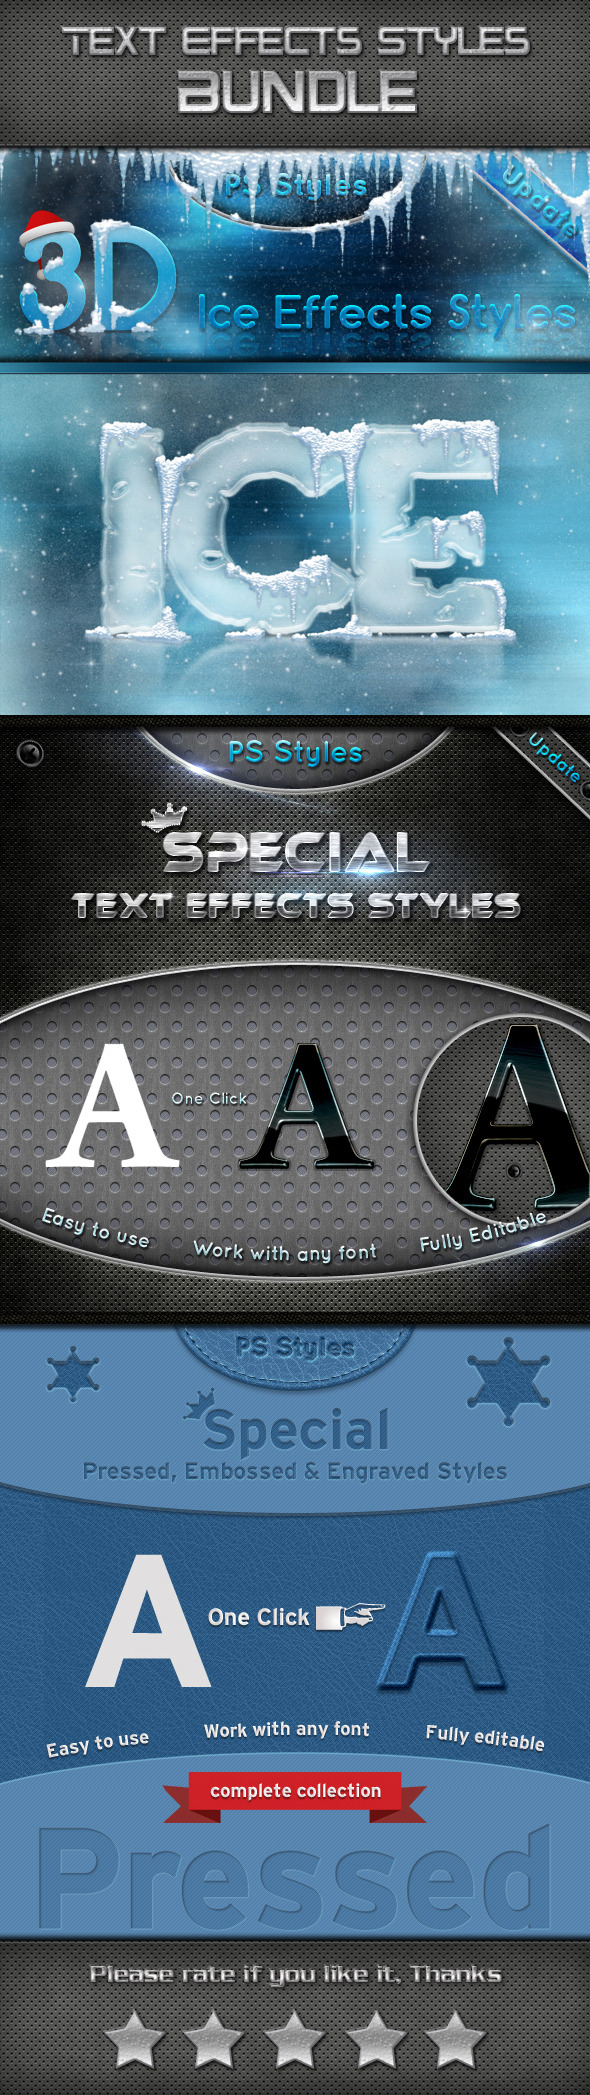 Text Effects Styles Bundle